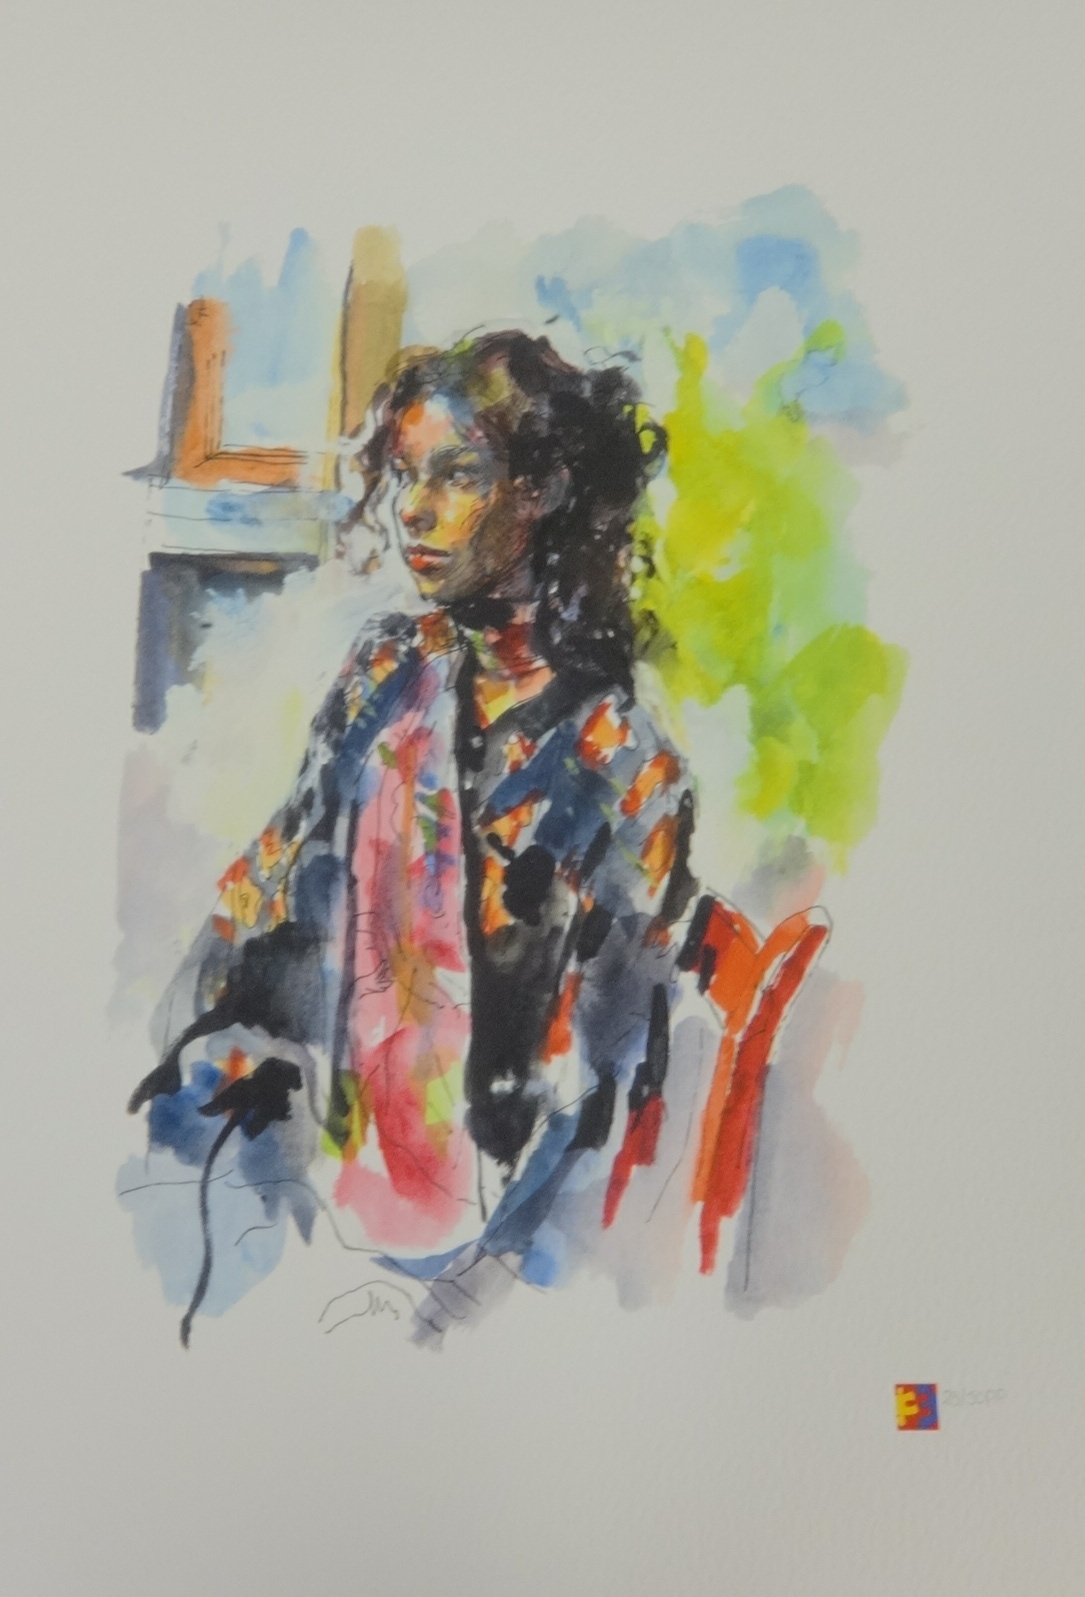 The Lenkiewicz Archive volume 1 'The Eliza Notebook', 1978-79 containing four illustrations